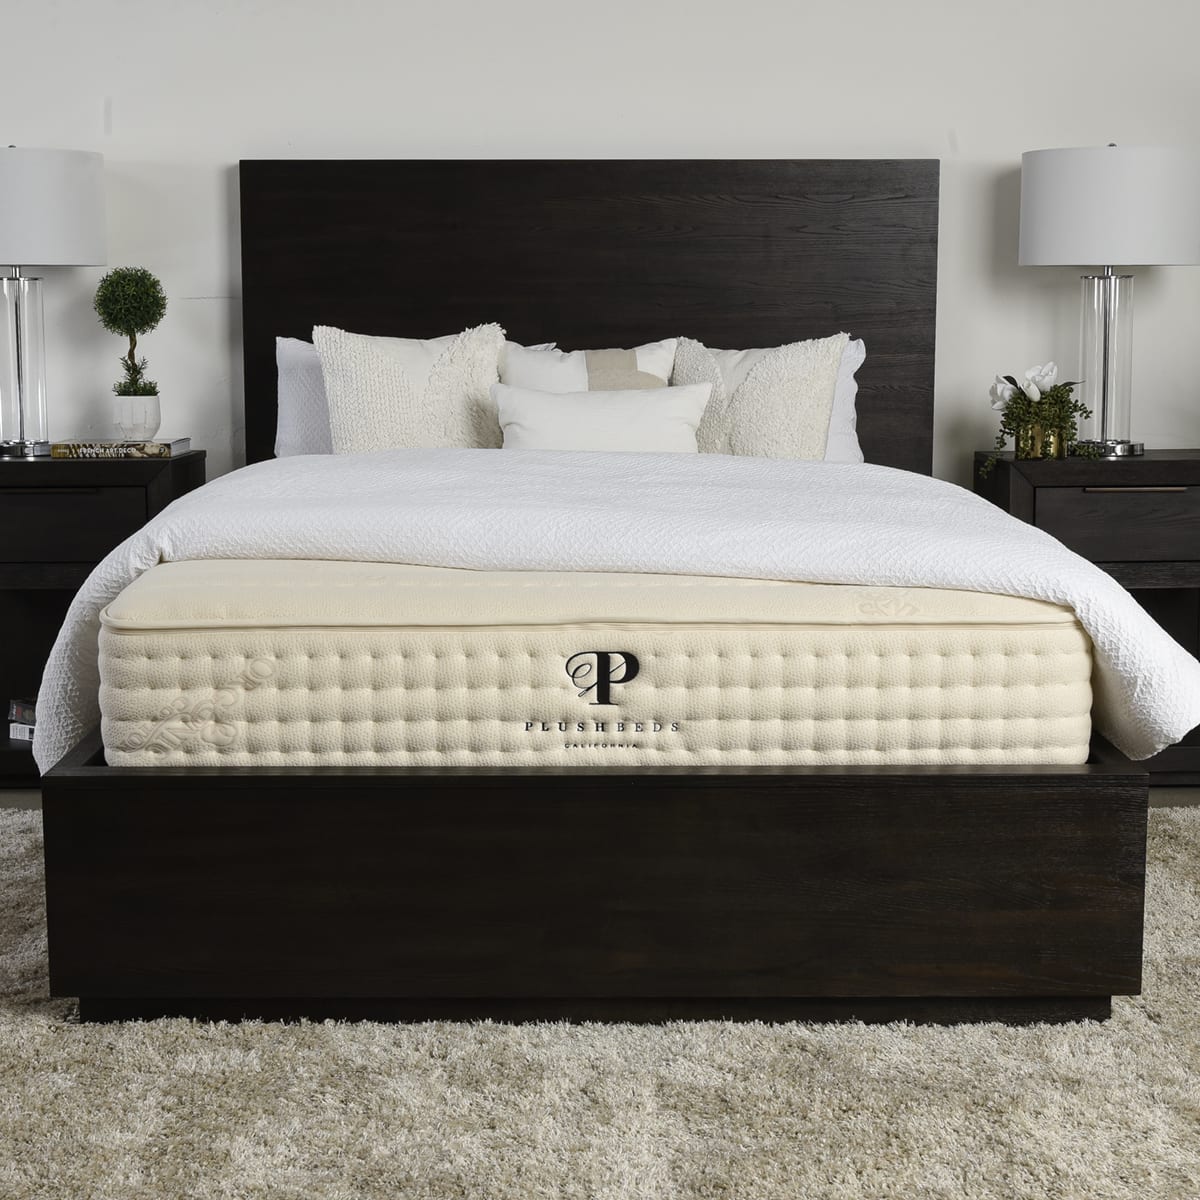 PlushBeds Luxury Bliss Mattress Review – Test Lab Ratings